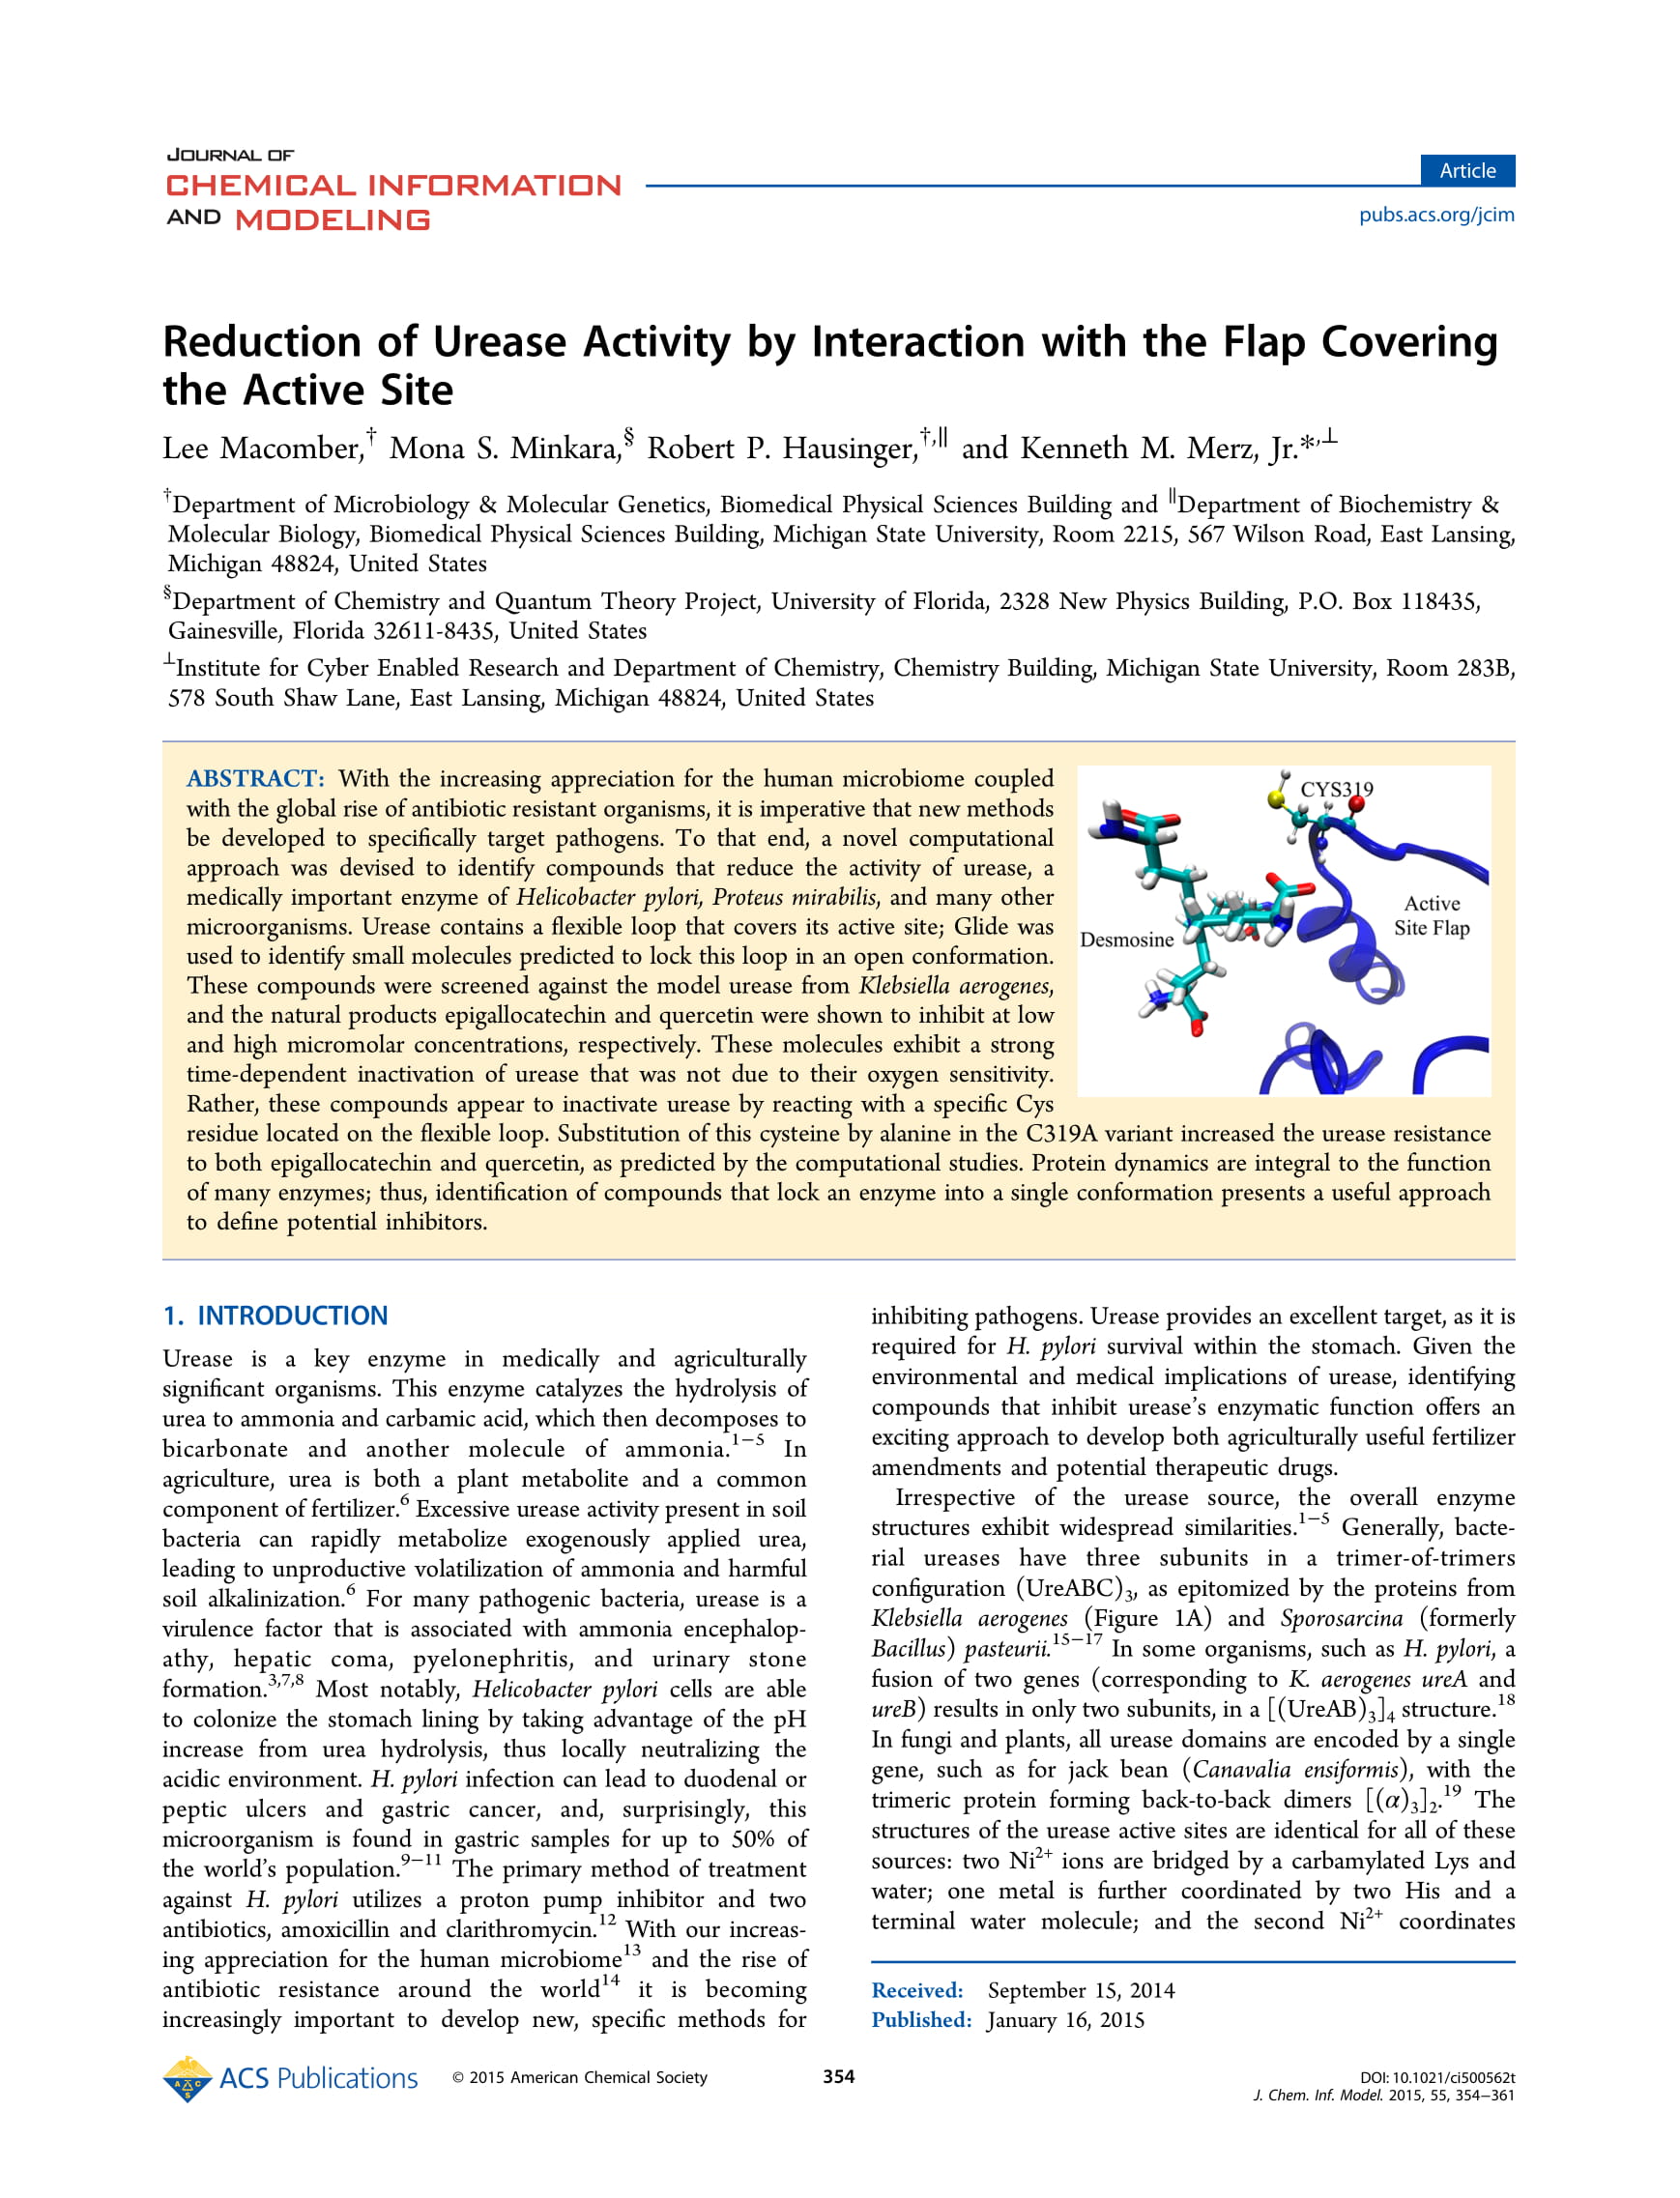 Reduction of Urease Activity by Interaction With the Flap Covering Active Site